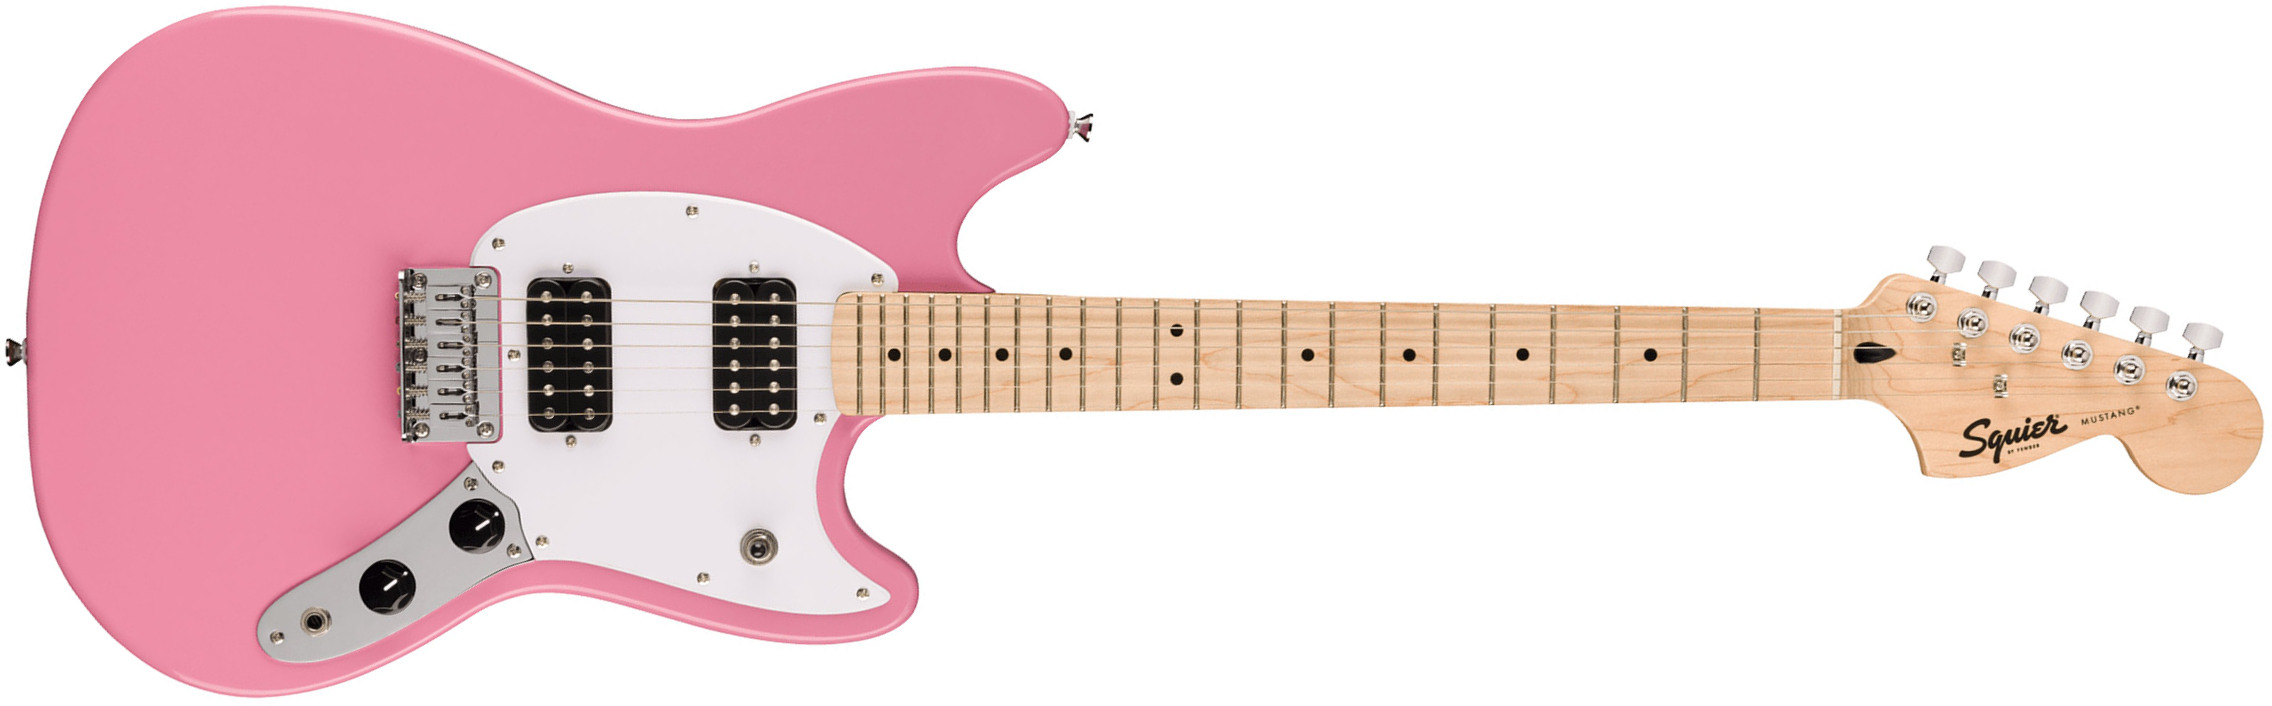 Squier Mustang Sonic Hh 2h Ht Mn - Flash Pink - Guitarra electrica retro rock - Main picture